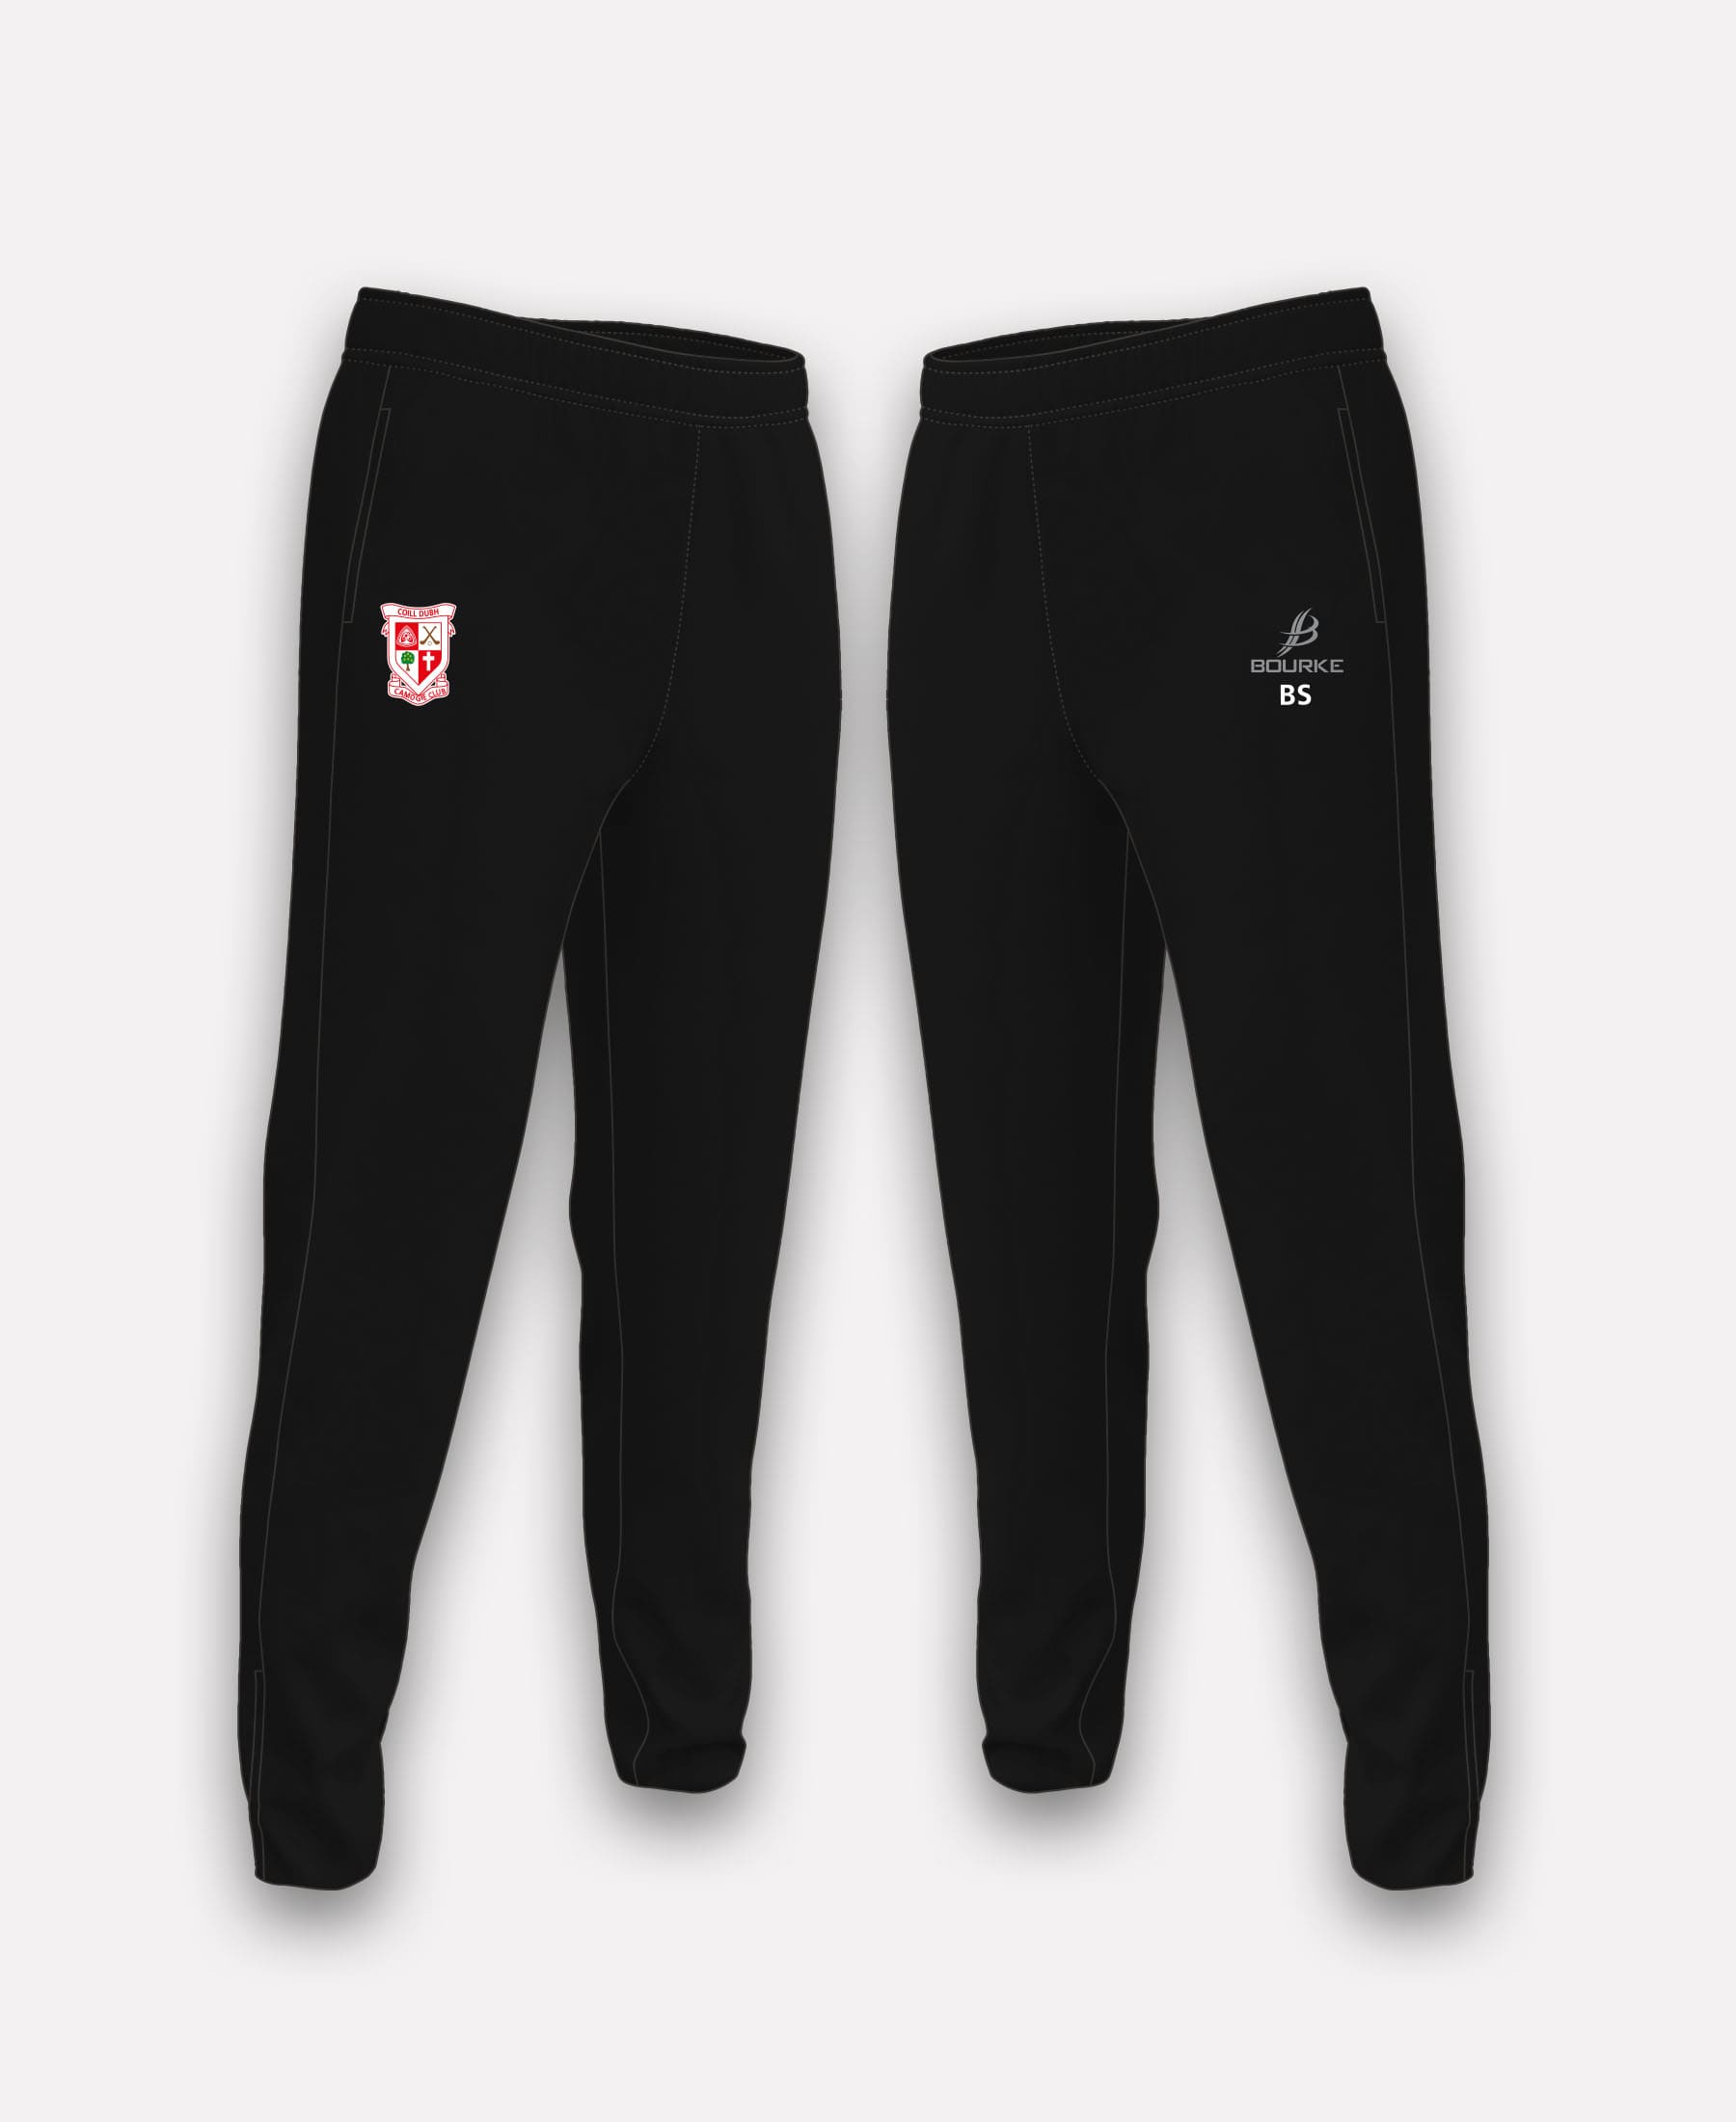 Coill Dubh Camogie BARR Joggers  (Black)